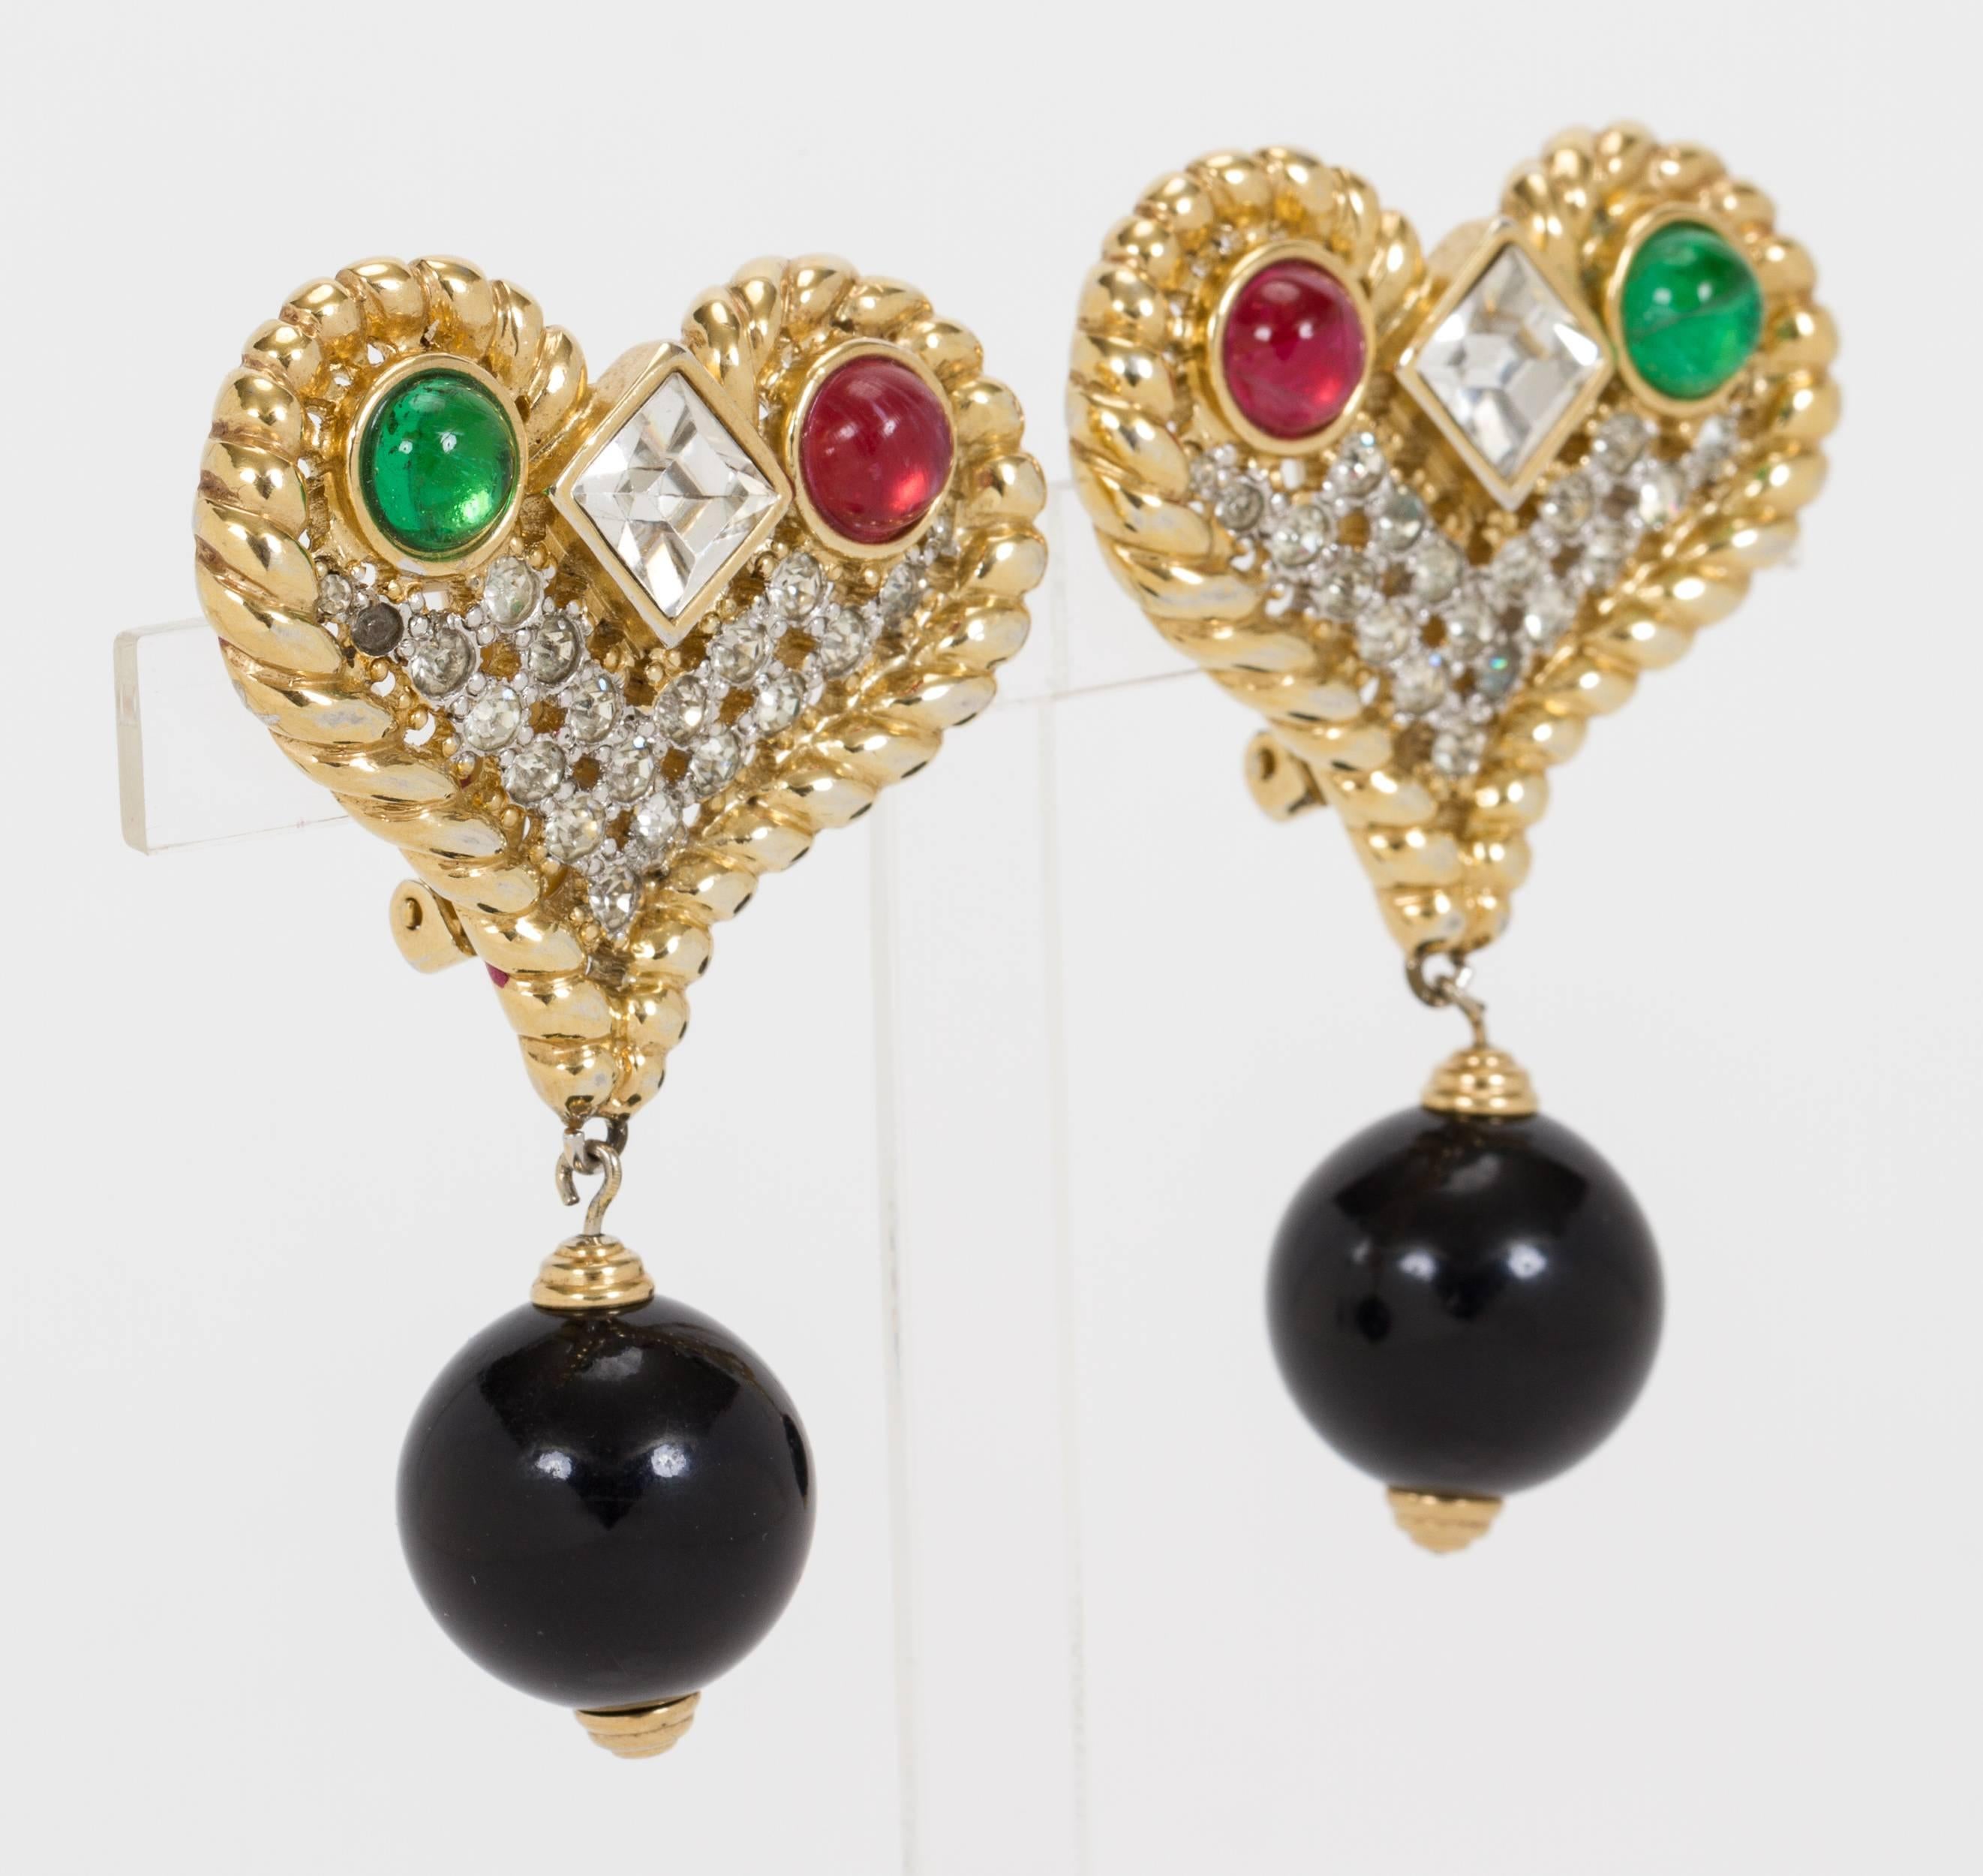 Valentino gold-plated oversize heart earrings with oversize black resin bead and glass multicolored rhinestones. Clip backs. Comes in a velvet pouch. Minimal wear.